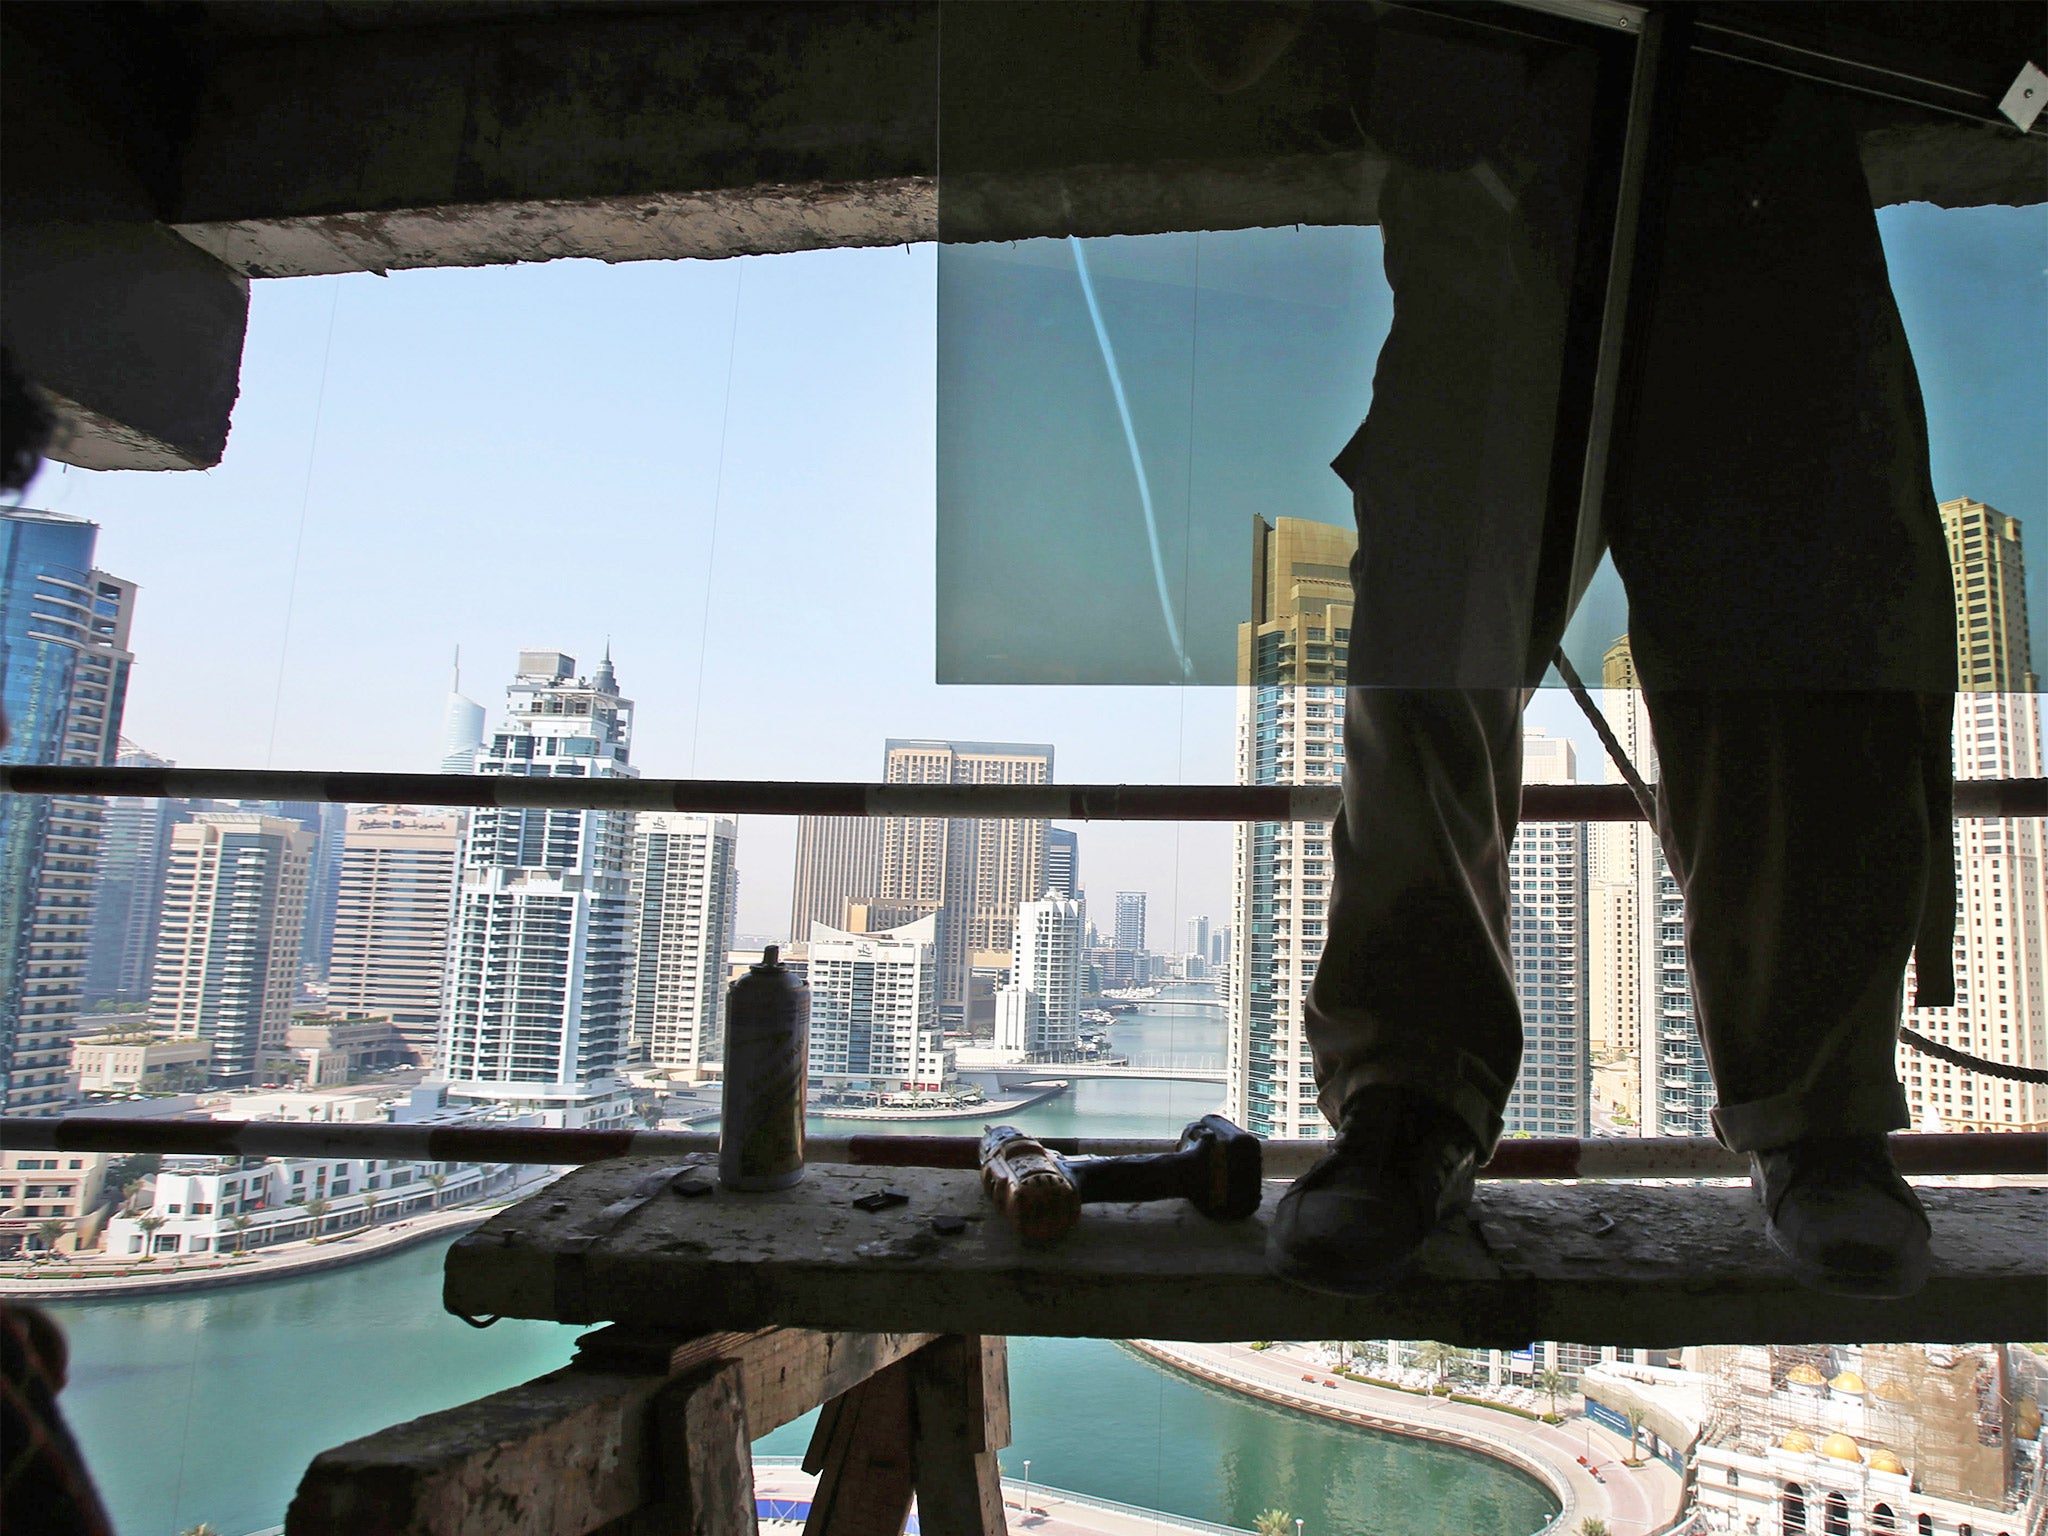 Faulty towers: Dubai is home to big business, luxury tourism and wealth but as in the rest of the UAE, its citizens are prevented from speaking out and risk jail if they do